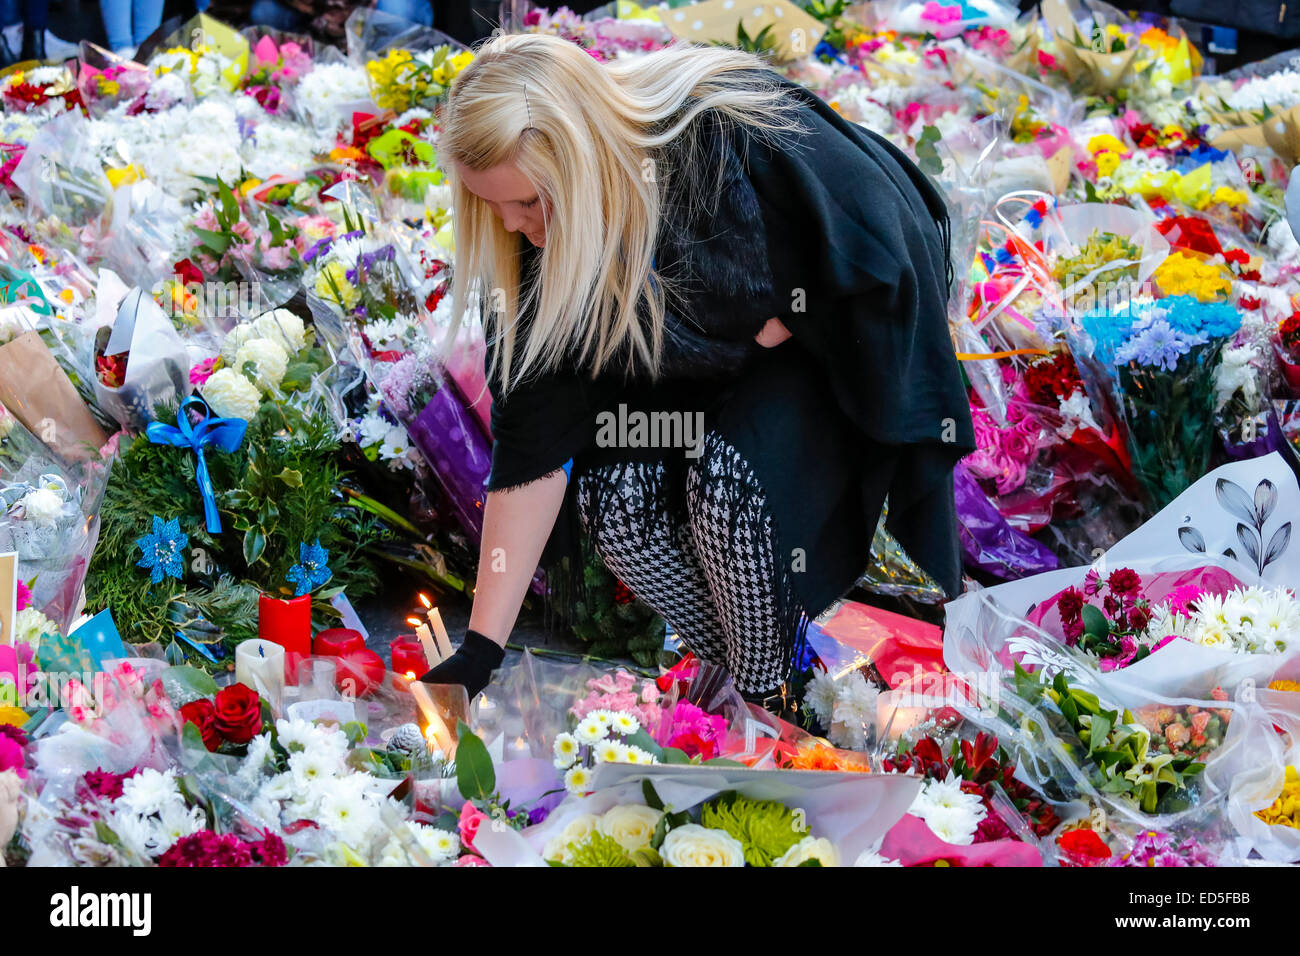 More than 1000 people took part in a 2 minute candle vigil in Royal Exchange Square, Glasgow in remembrance of the 6 people who were victims of the Glasgow Bin lorry crash in George Square a week ago. Many people brought  flowers, candles and some said prayers as a mark of support and condolences. Stock Photo